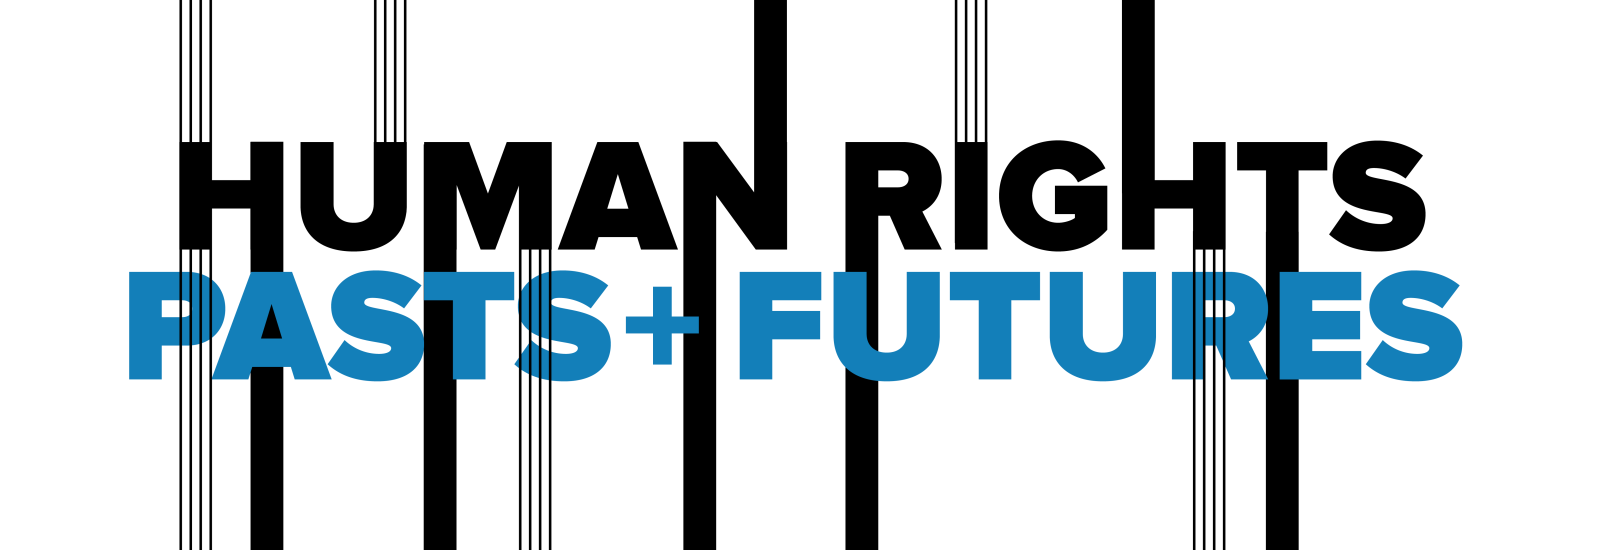 Text "HUMAN RIGHTS PASTS + FUTURES" with vertical linework